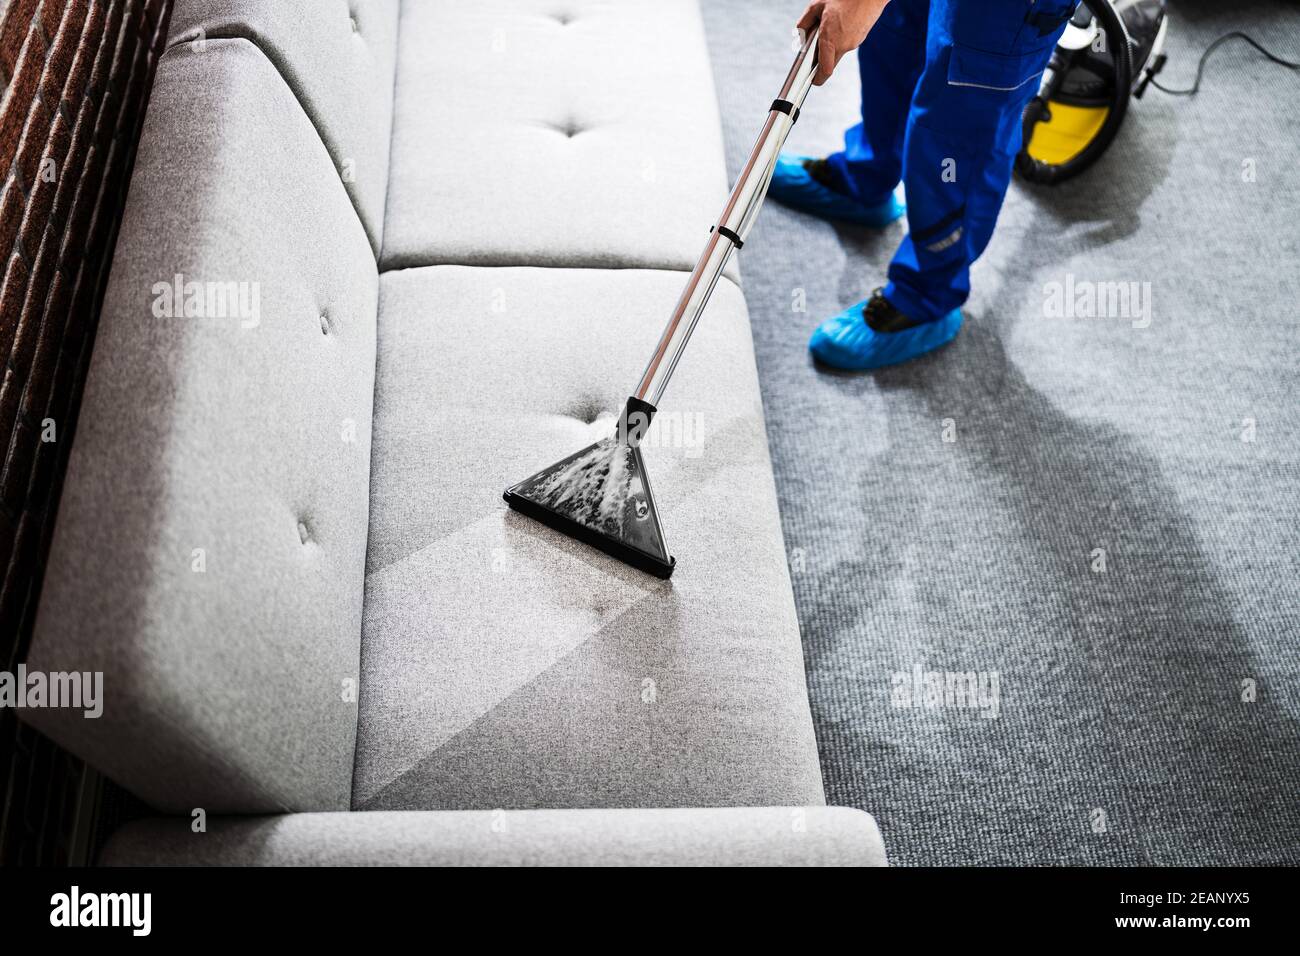 Professional Sofa Cleaning Service Stock Photo